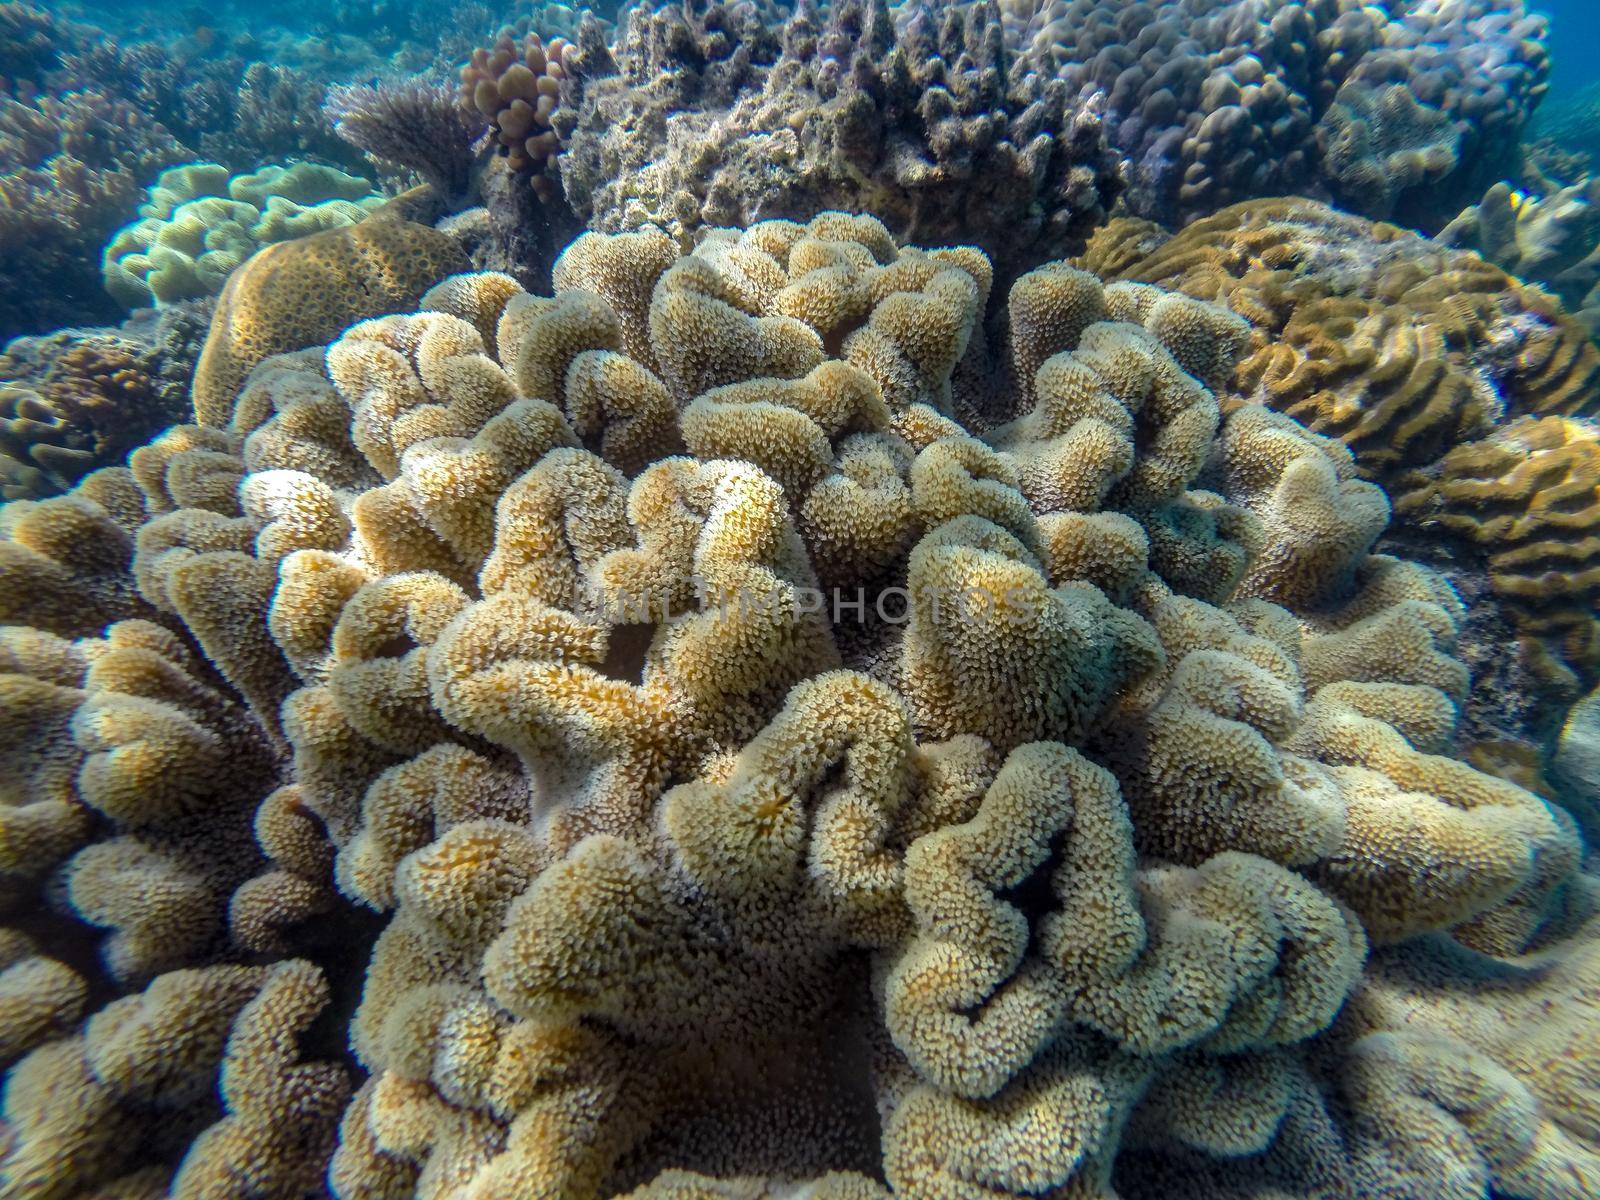 Colorful corals in shallow water at Outer Barrier Reef - Great Barrier Reef Australia by bettercallcurry